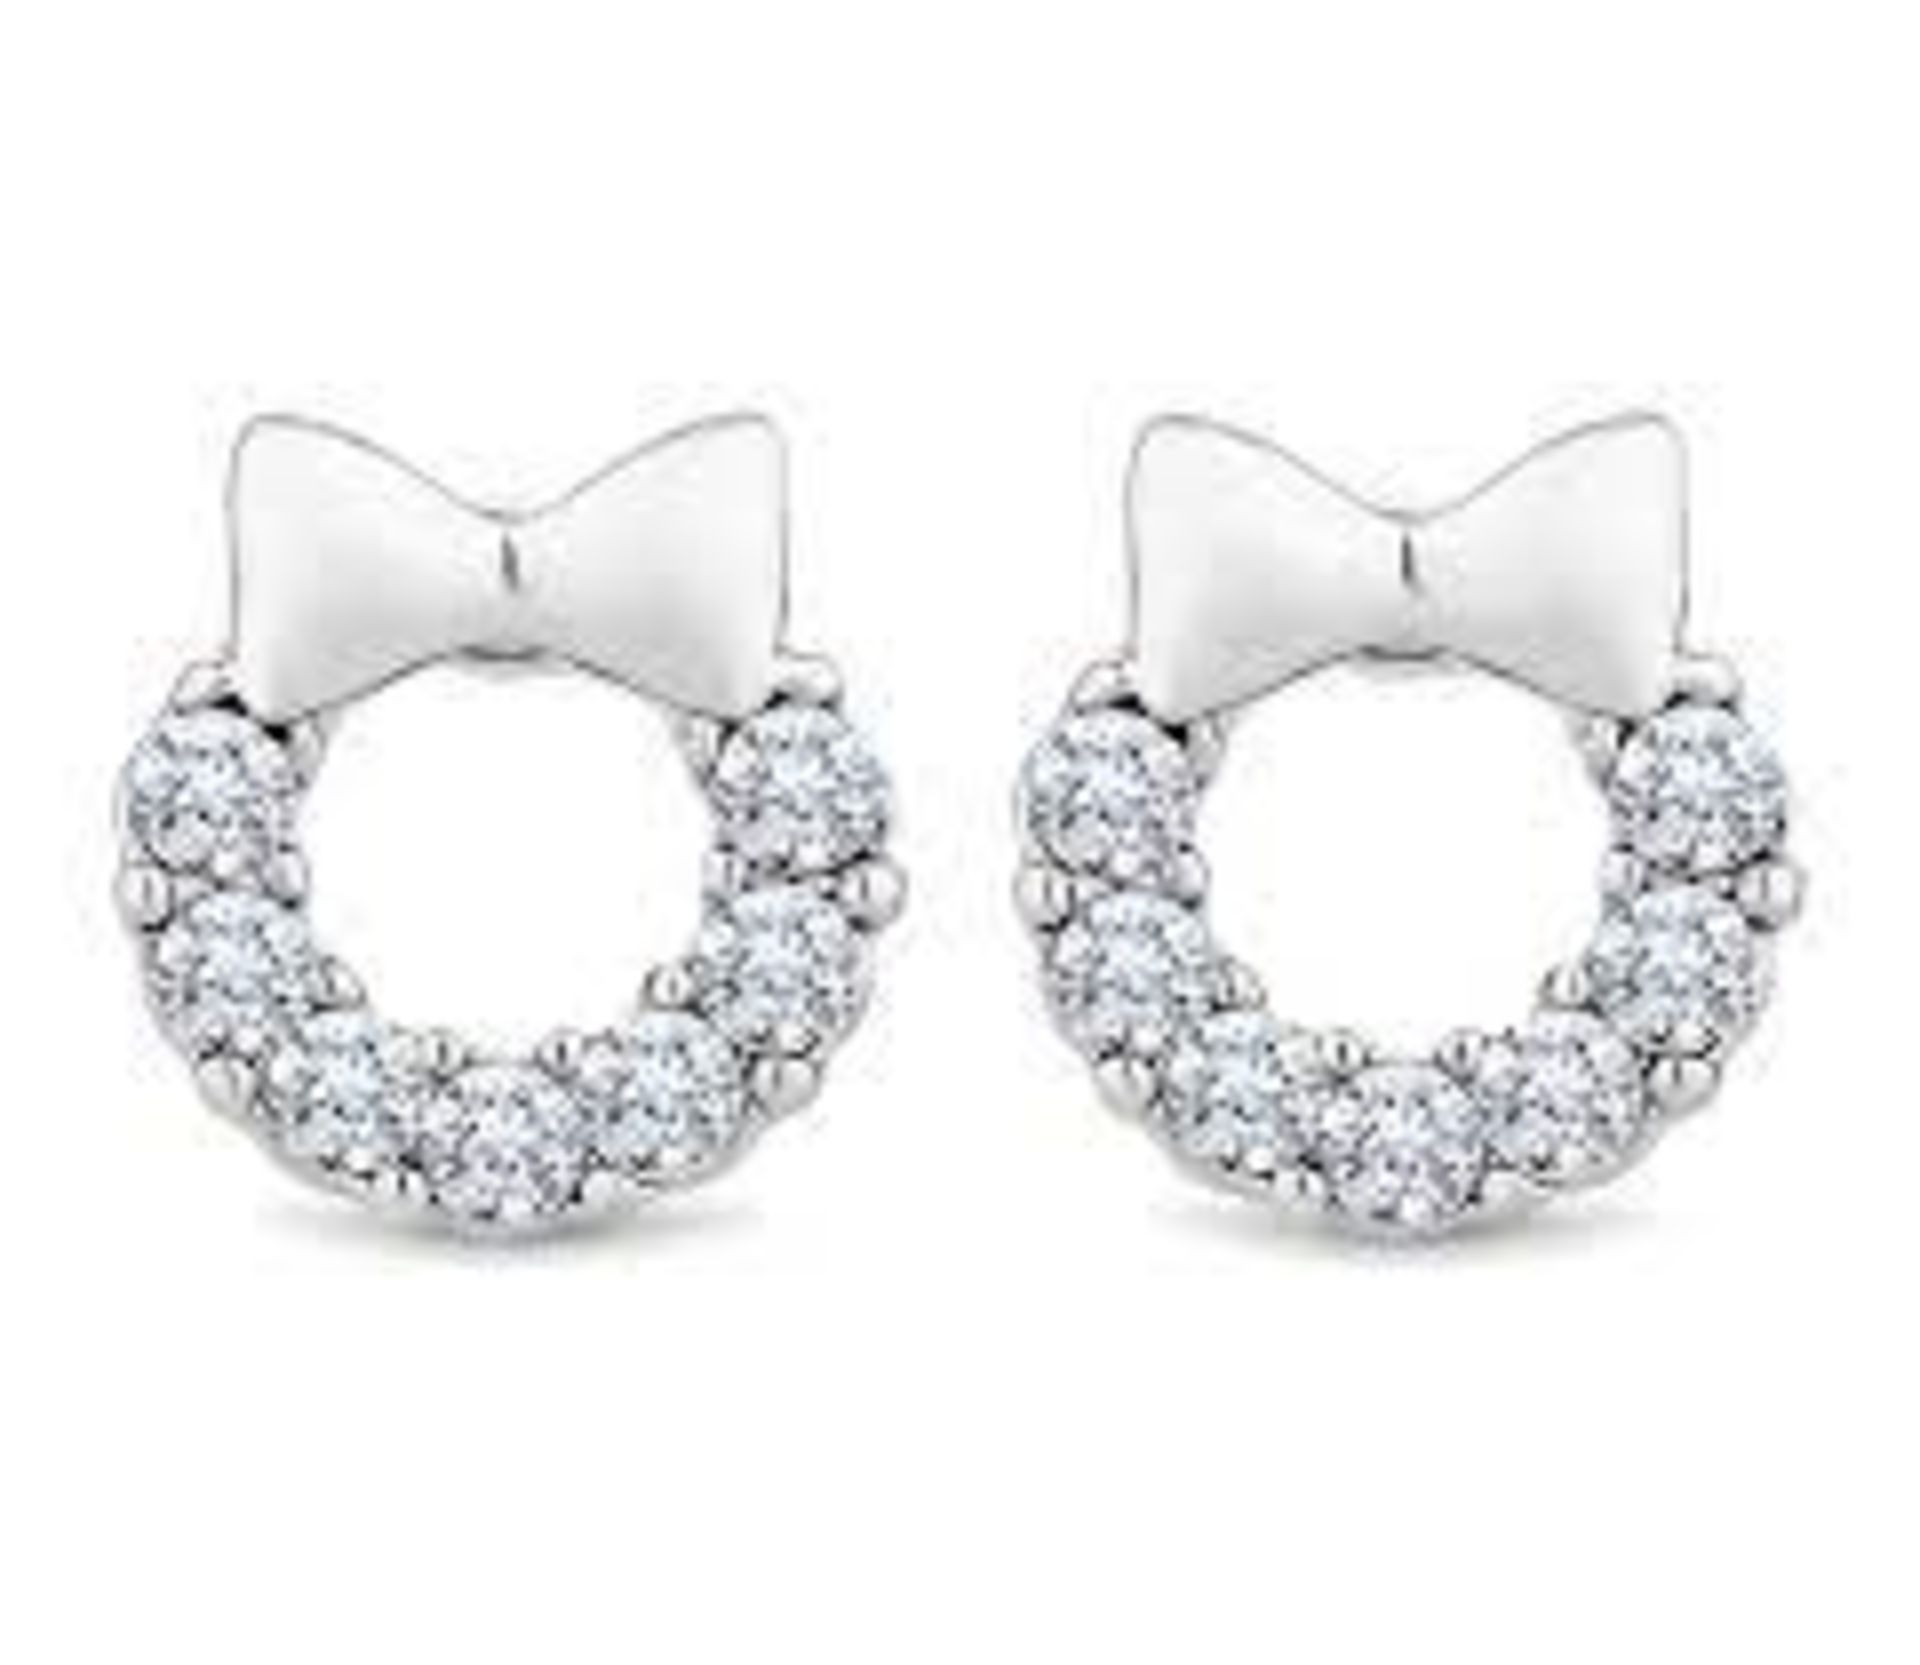 9 X BRAND NEW DIAMONDSTYLE LONDON WREATH STUD EARRINGS WITH CERTIFICATION OF AUTHENTICITY RRP £45